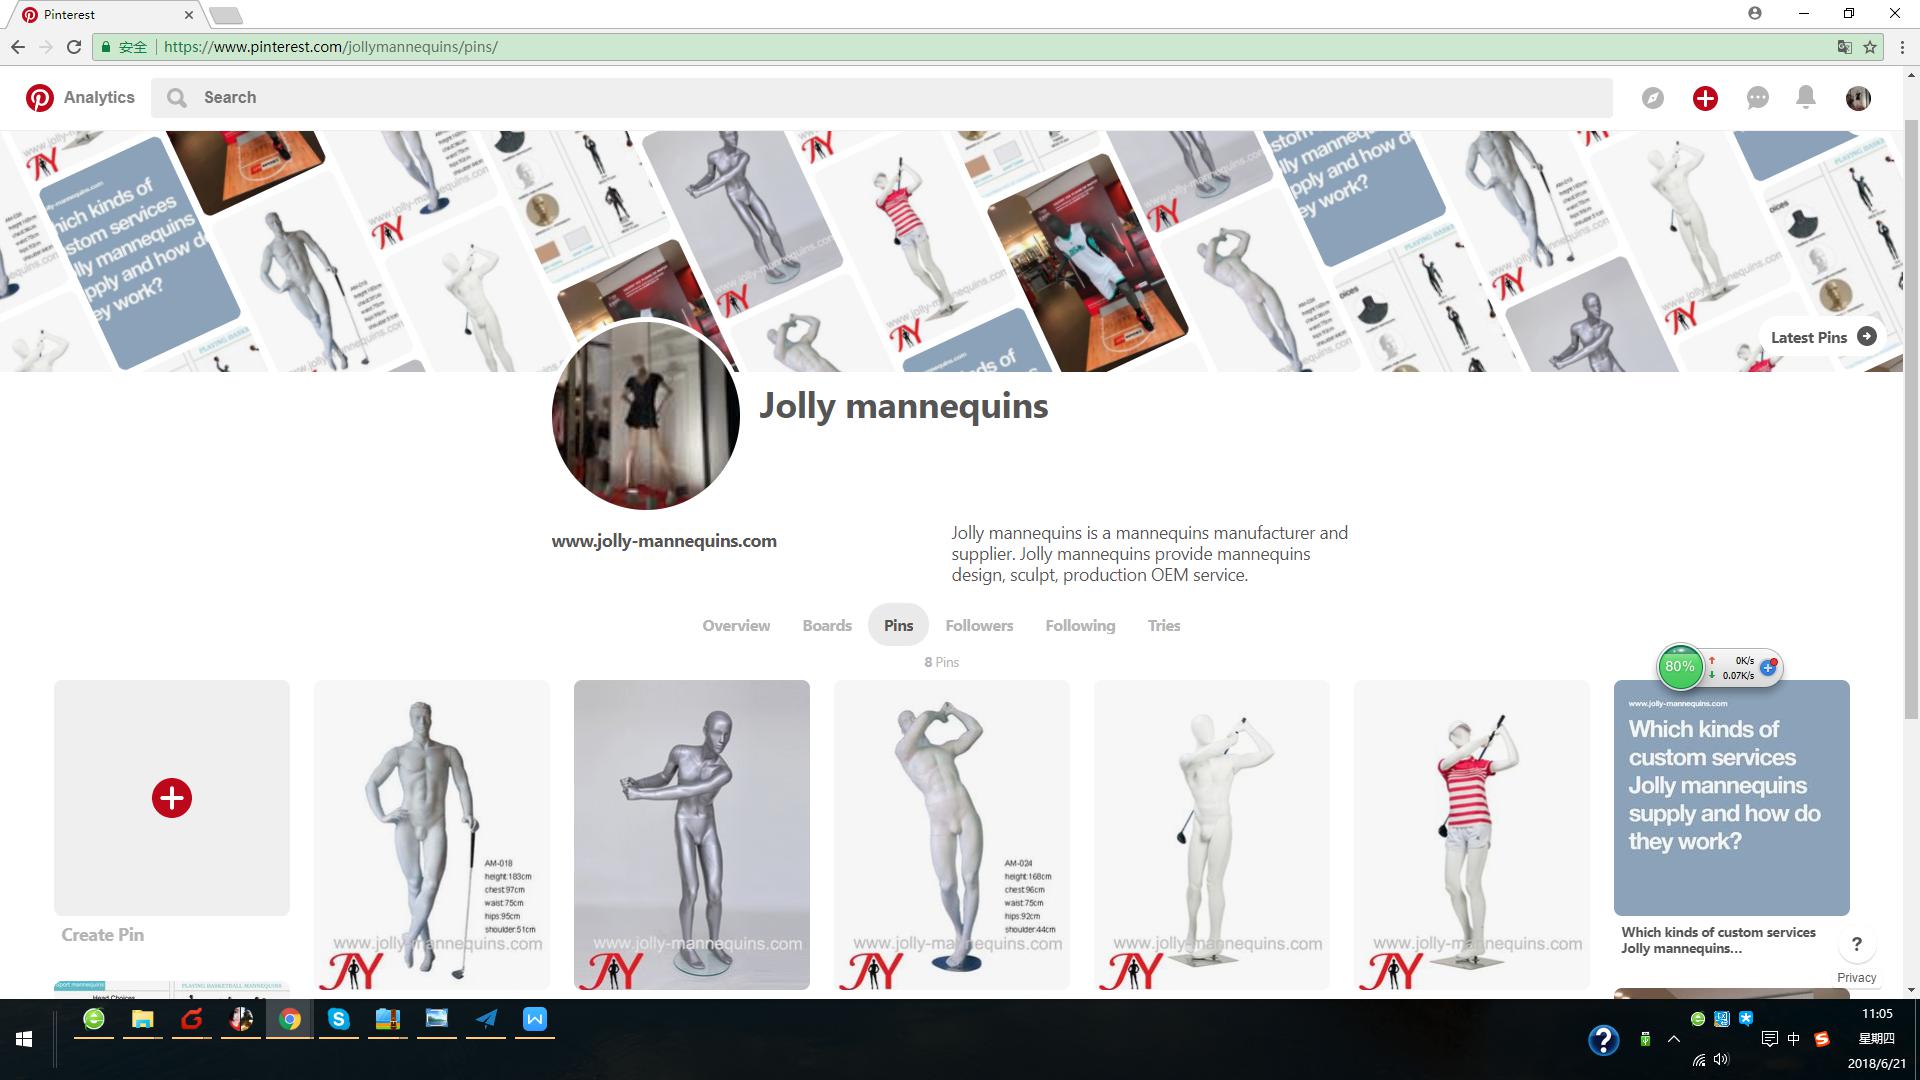 Jolly mannequins-pinterest account is launched